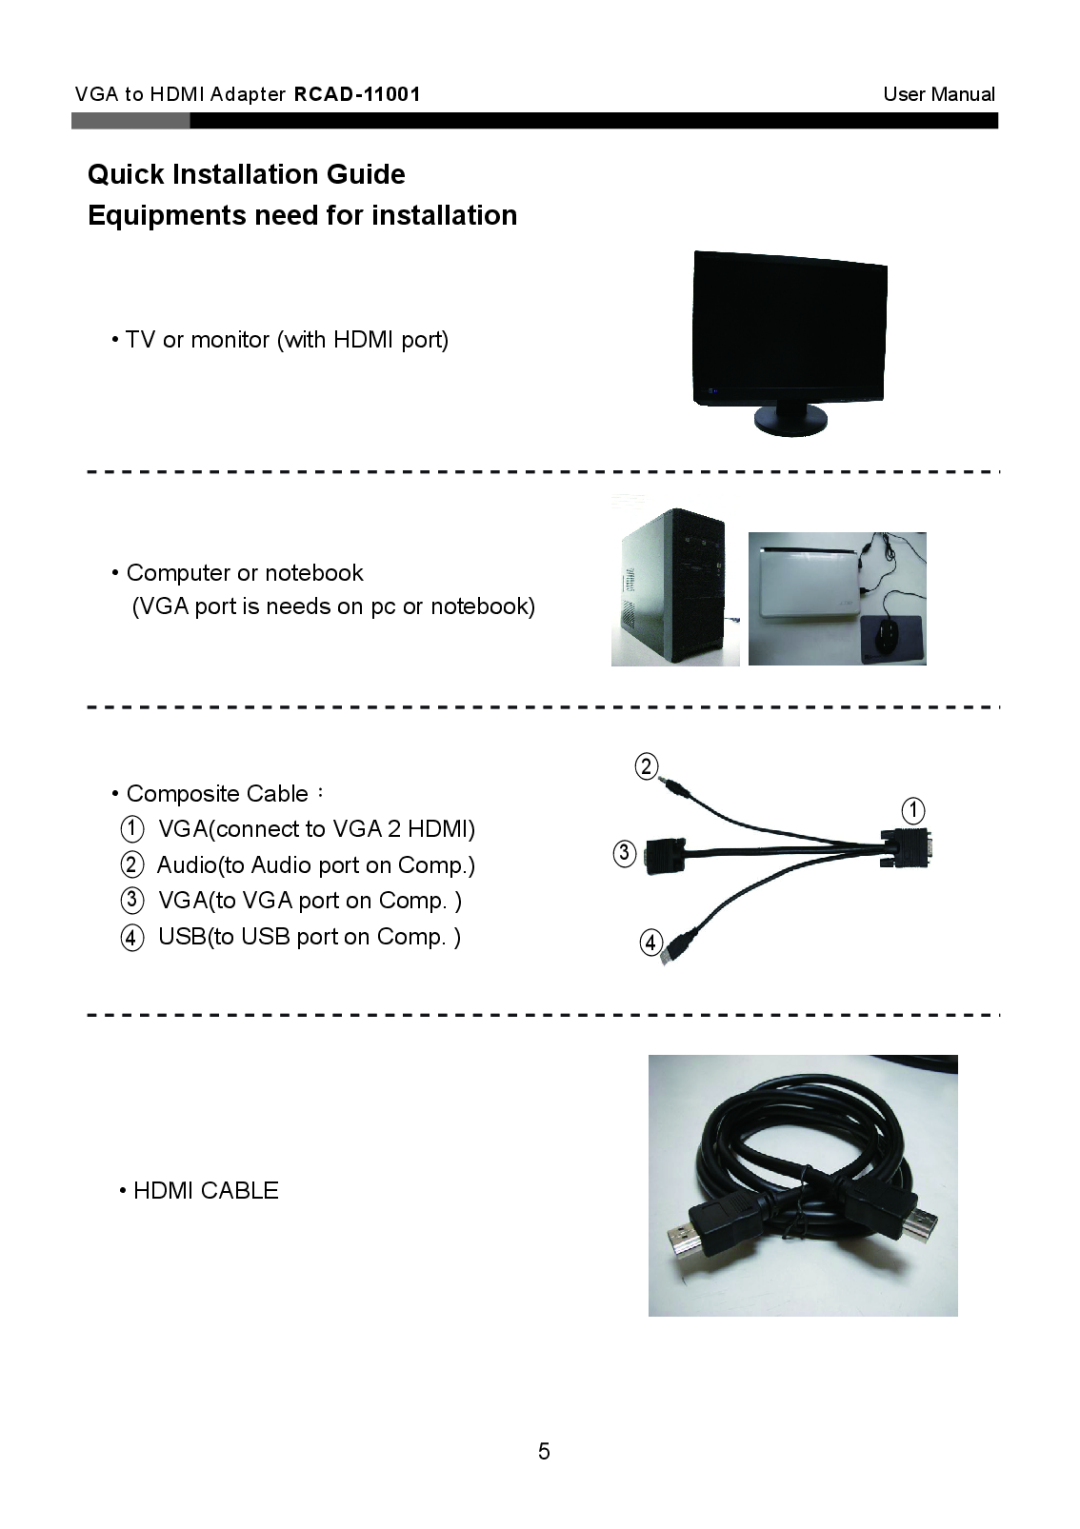 Rosewill RCAD-11001 Quick Installation Guide Equipments need for installation, USBto USB port on Comp HDMI CABLE 